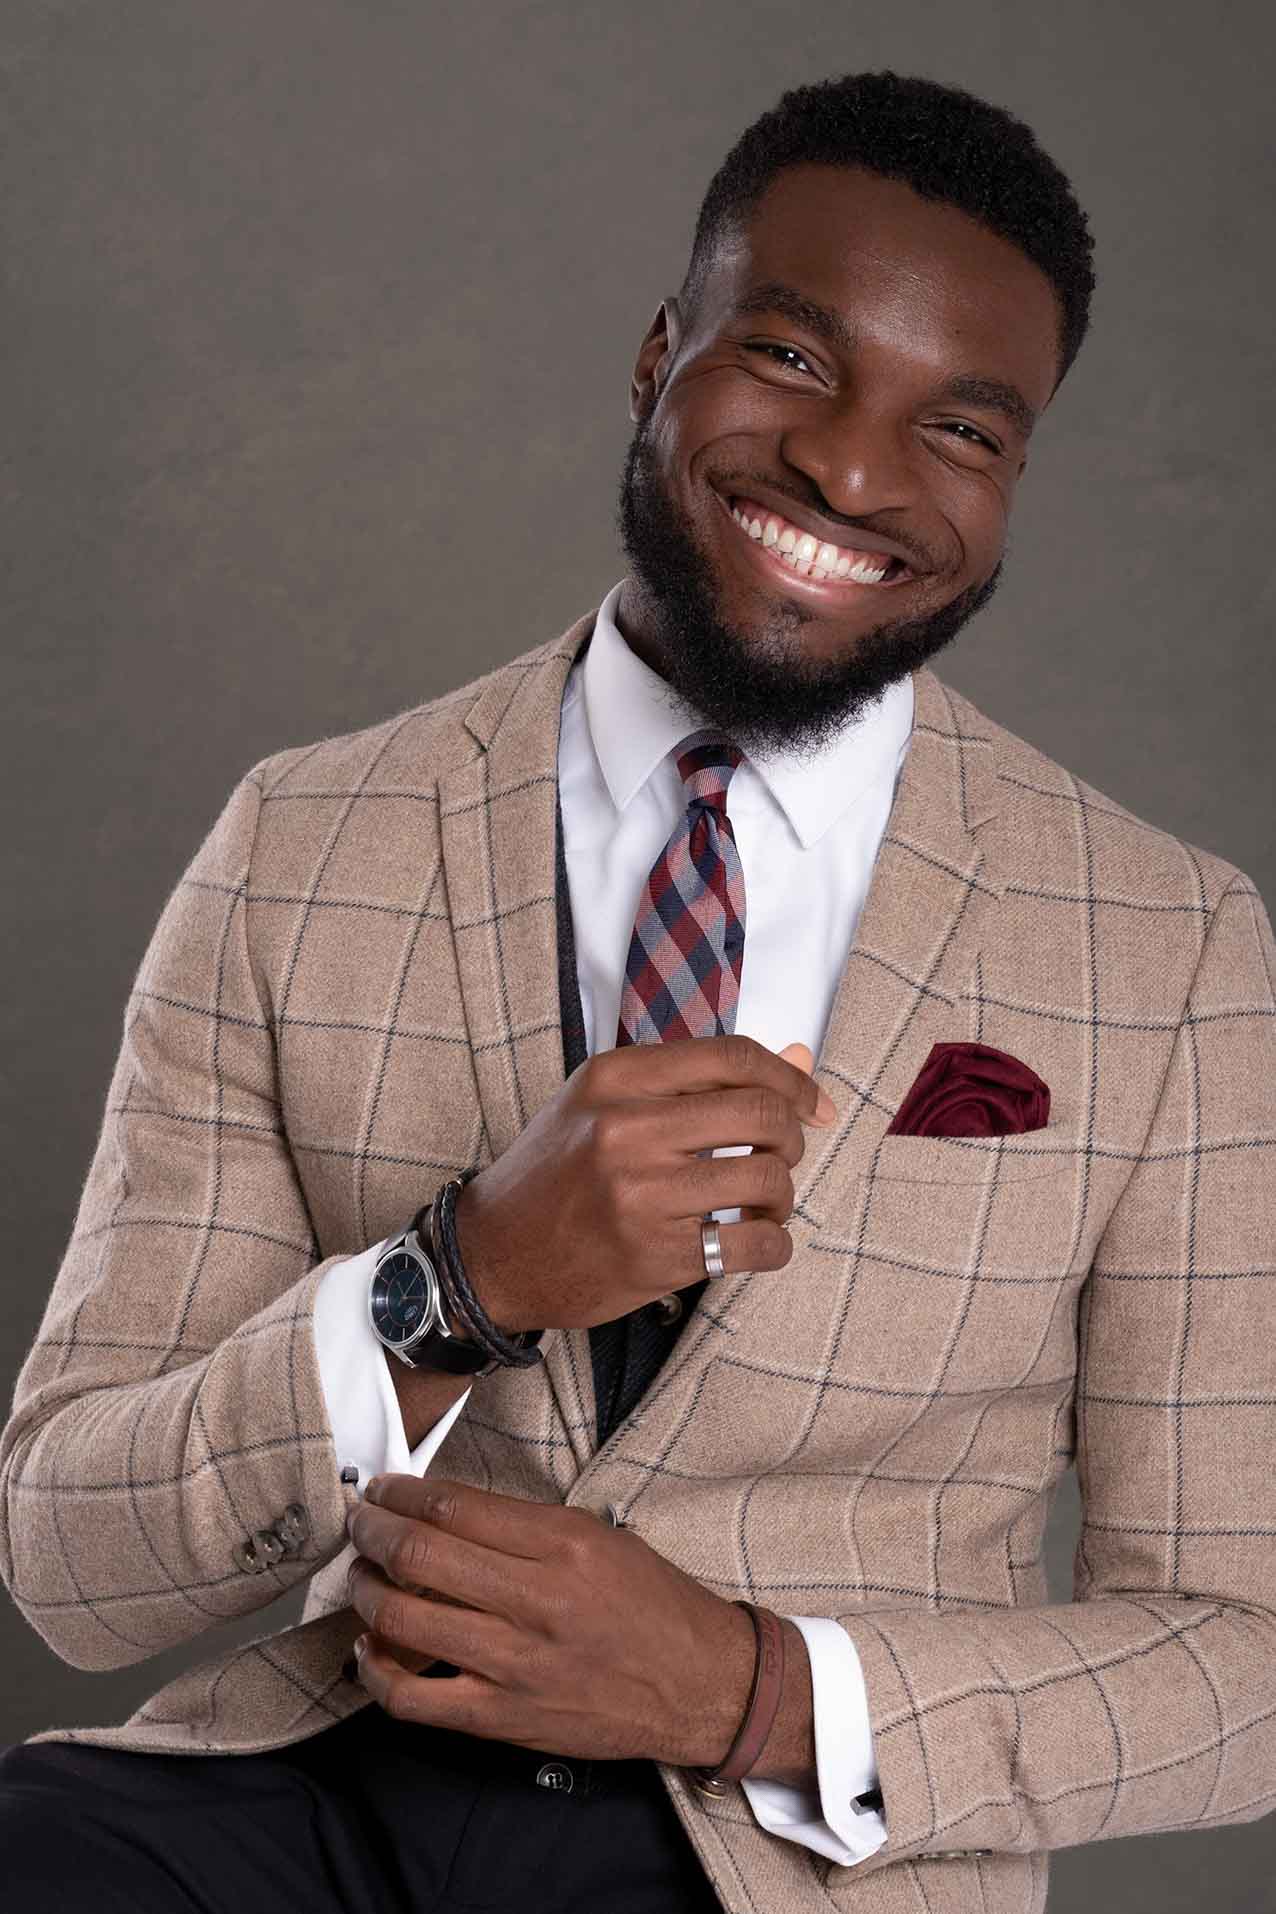 magazine style business portrait of a man smiling